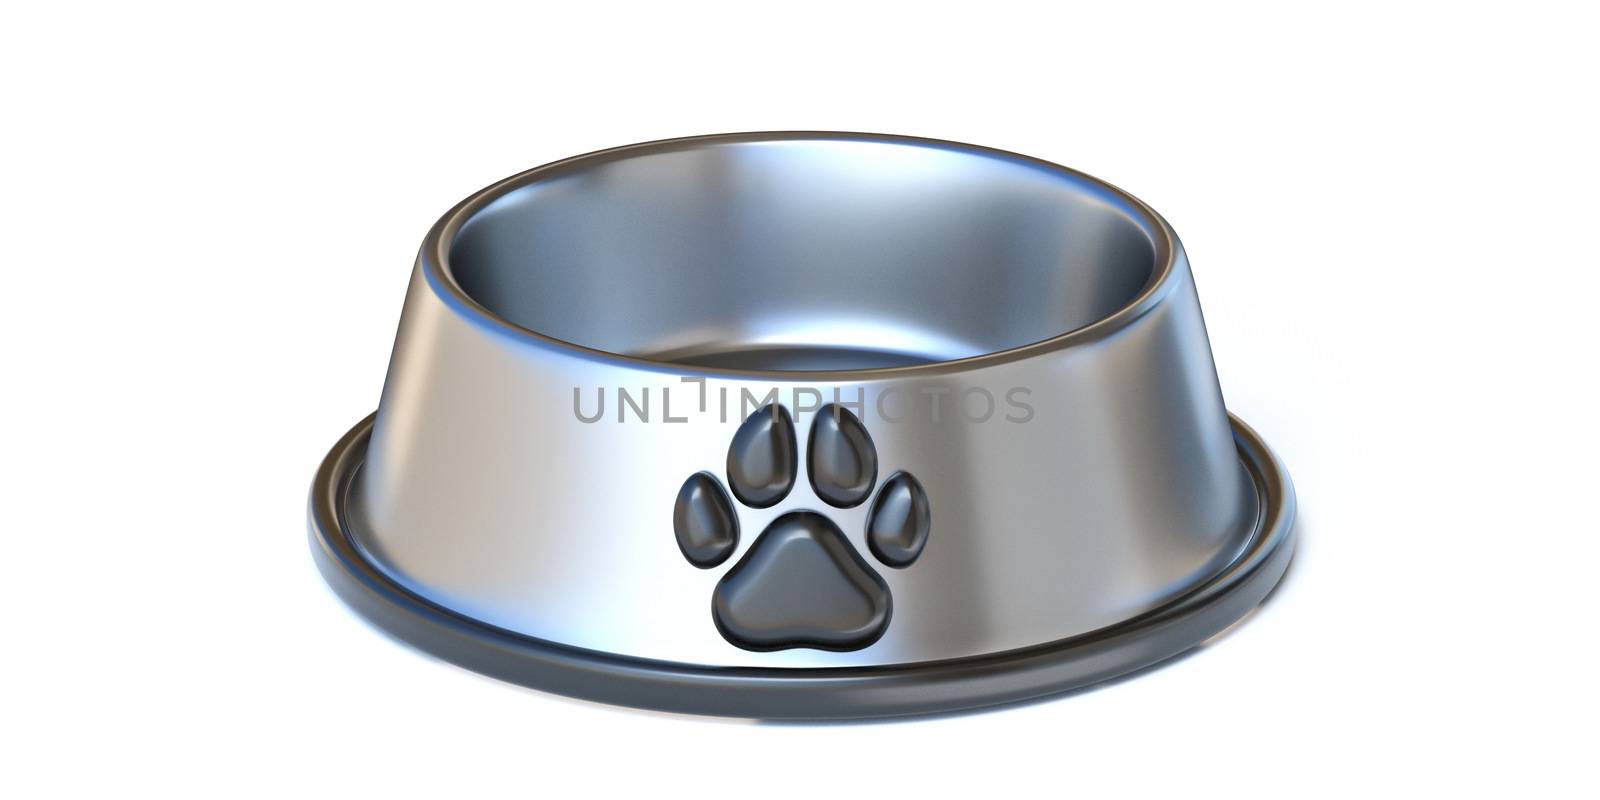 Stainless steel pet food bowl 3D render illustration isolated on white background